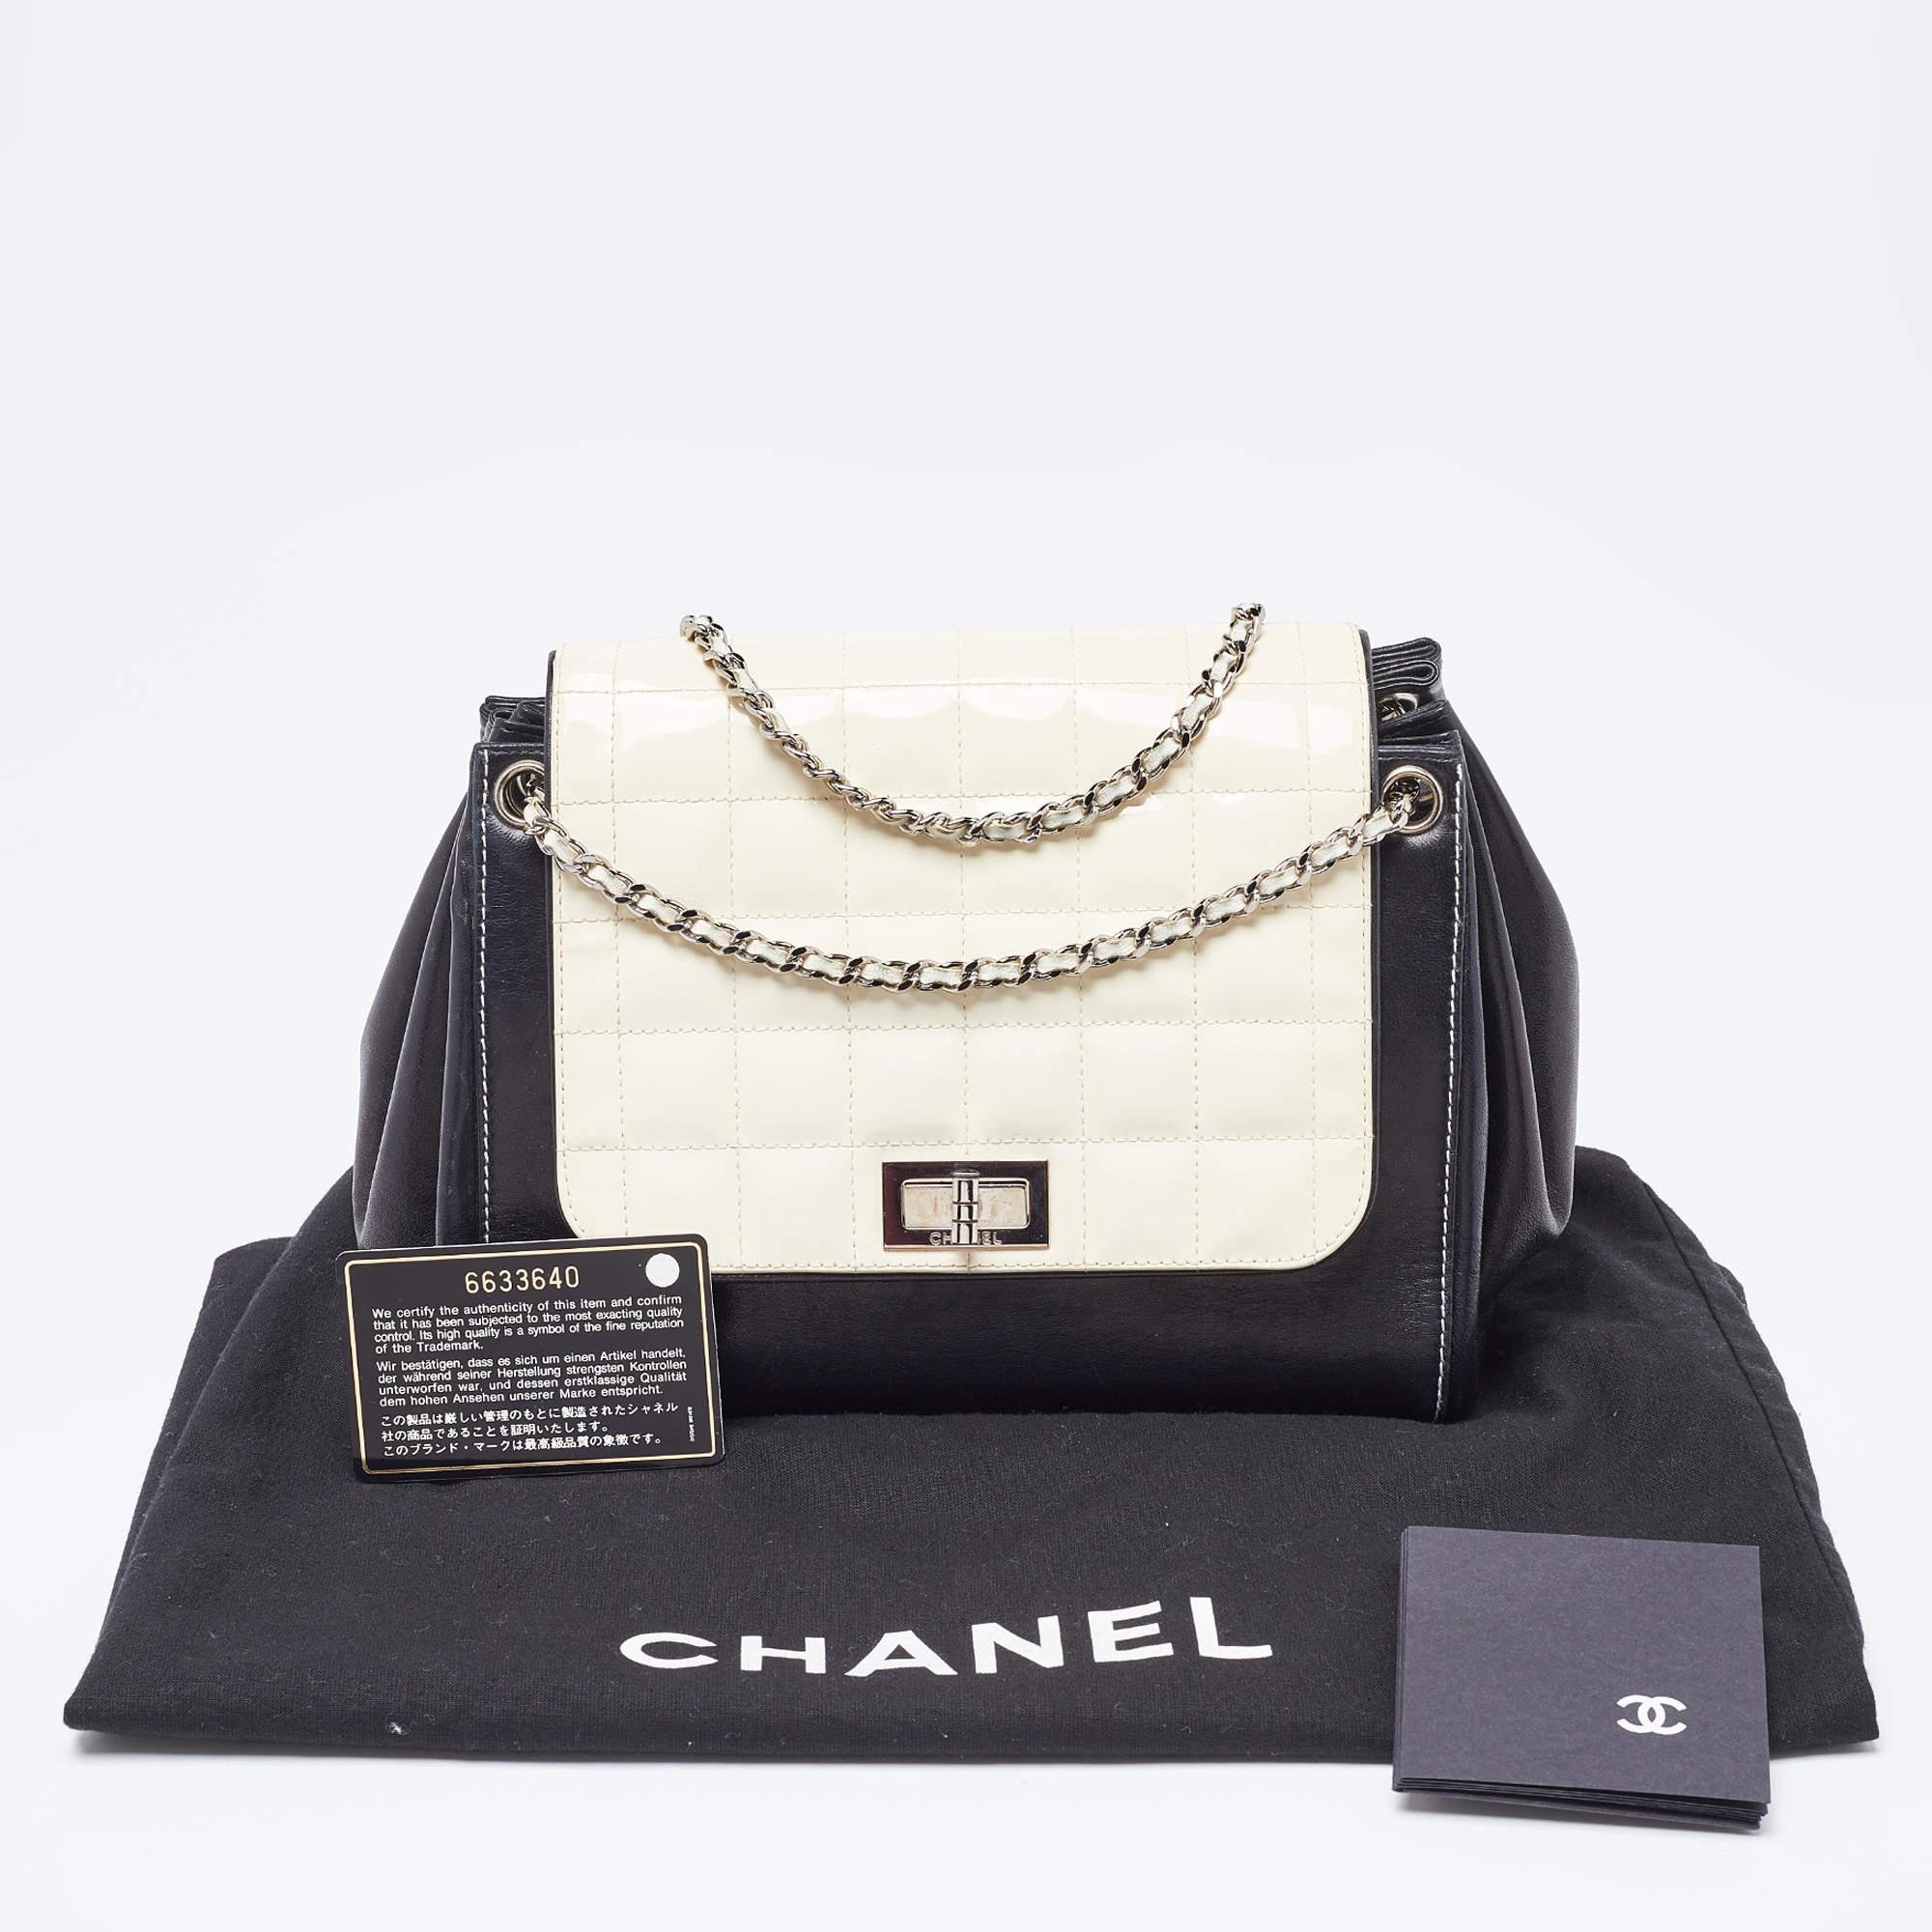 Chanel Black/White Square Quilted Patent Leather Accordion Flap Bag 10